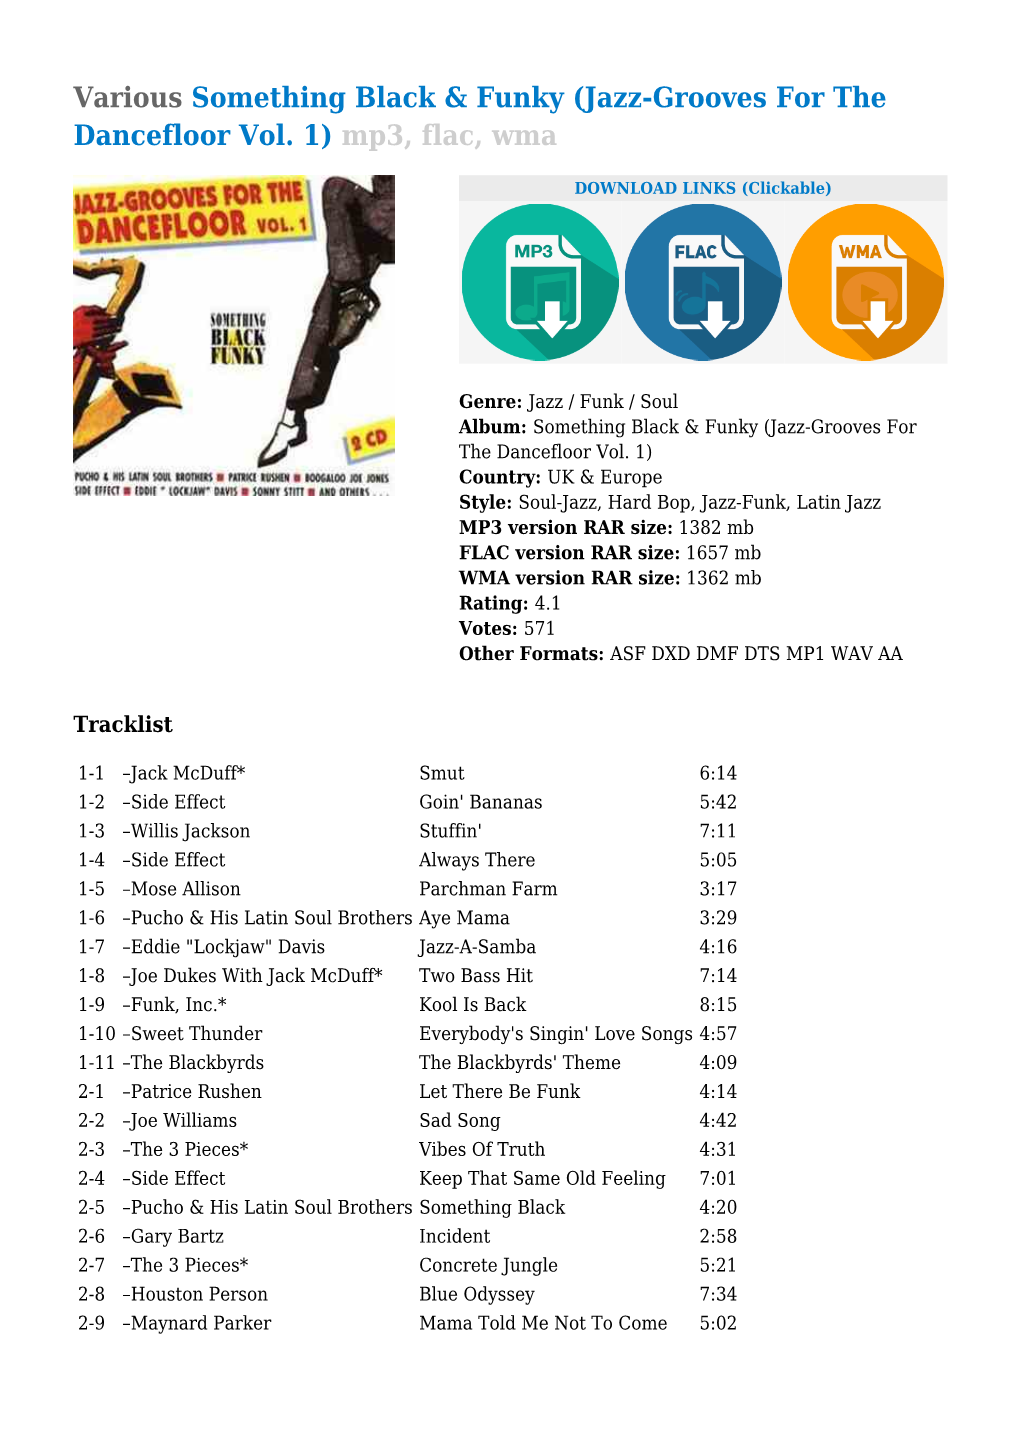 Various Something Black & Funky (Jazz-Grooves for the Dancefloor Vol. 1) Mp3, Flac